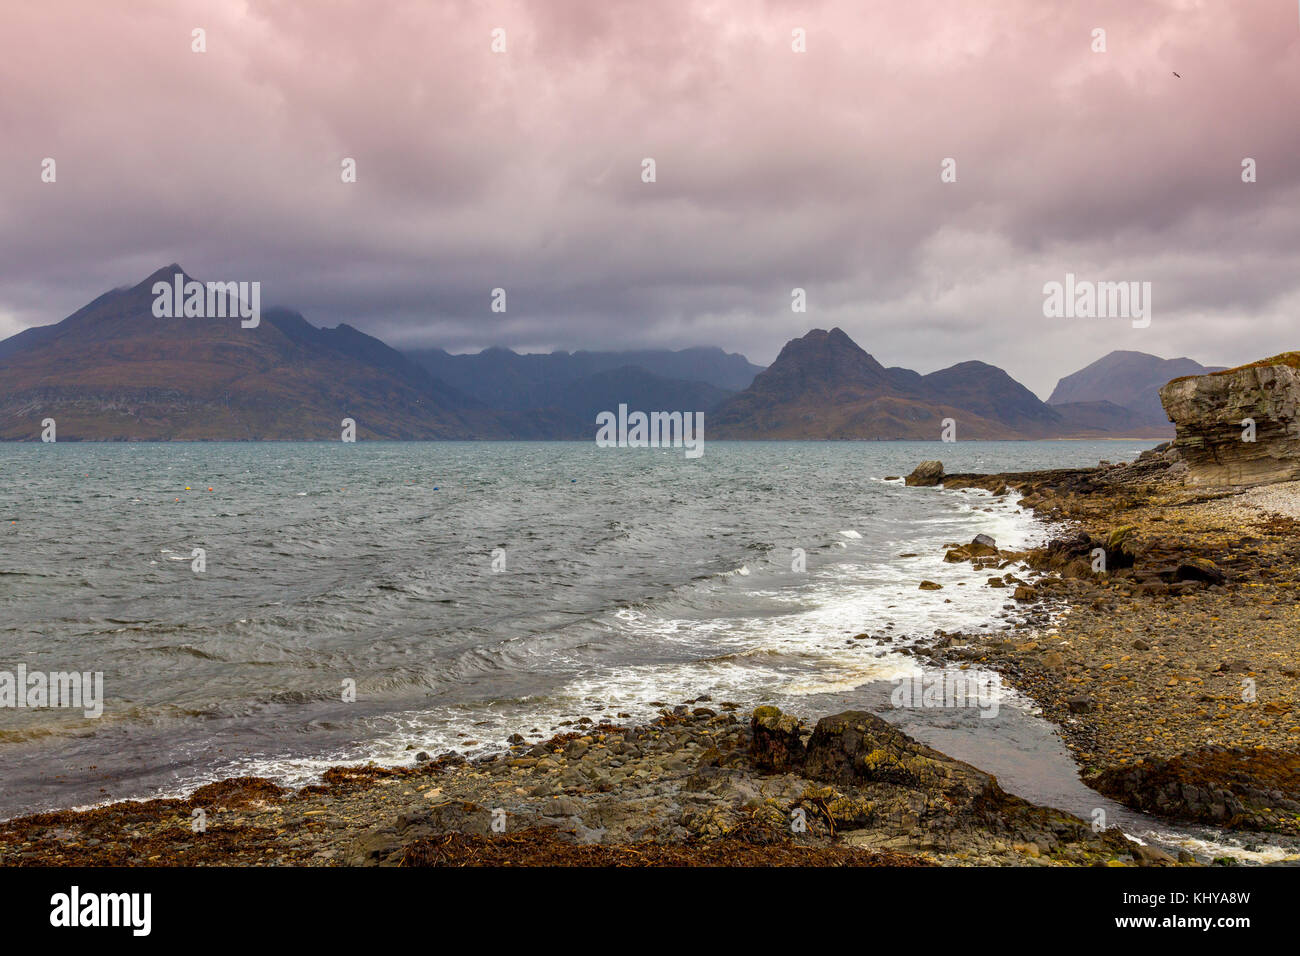 Brooding clouds and dark skies hang over the Black Cuillin hills viewed from Elgol beach on the Isle of Skye, Scotland, UK Stock Photo